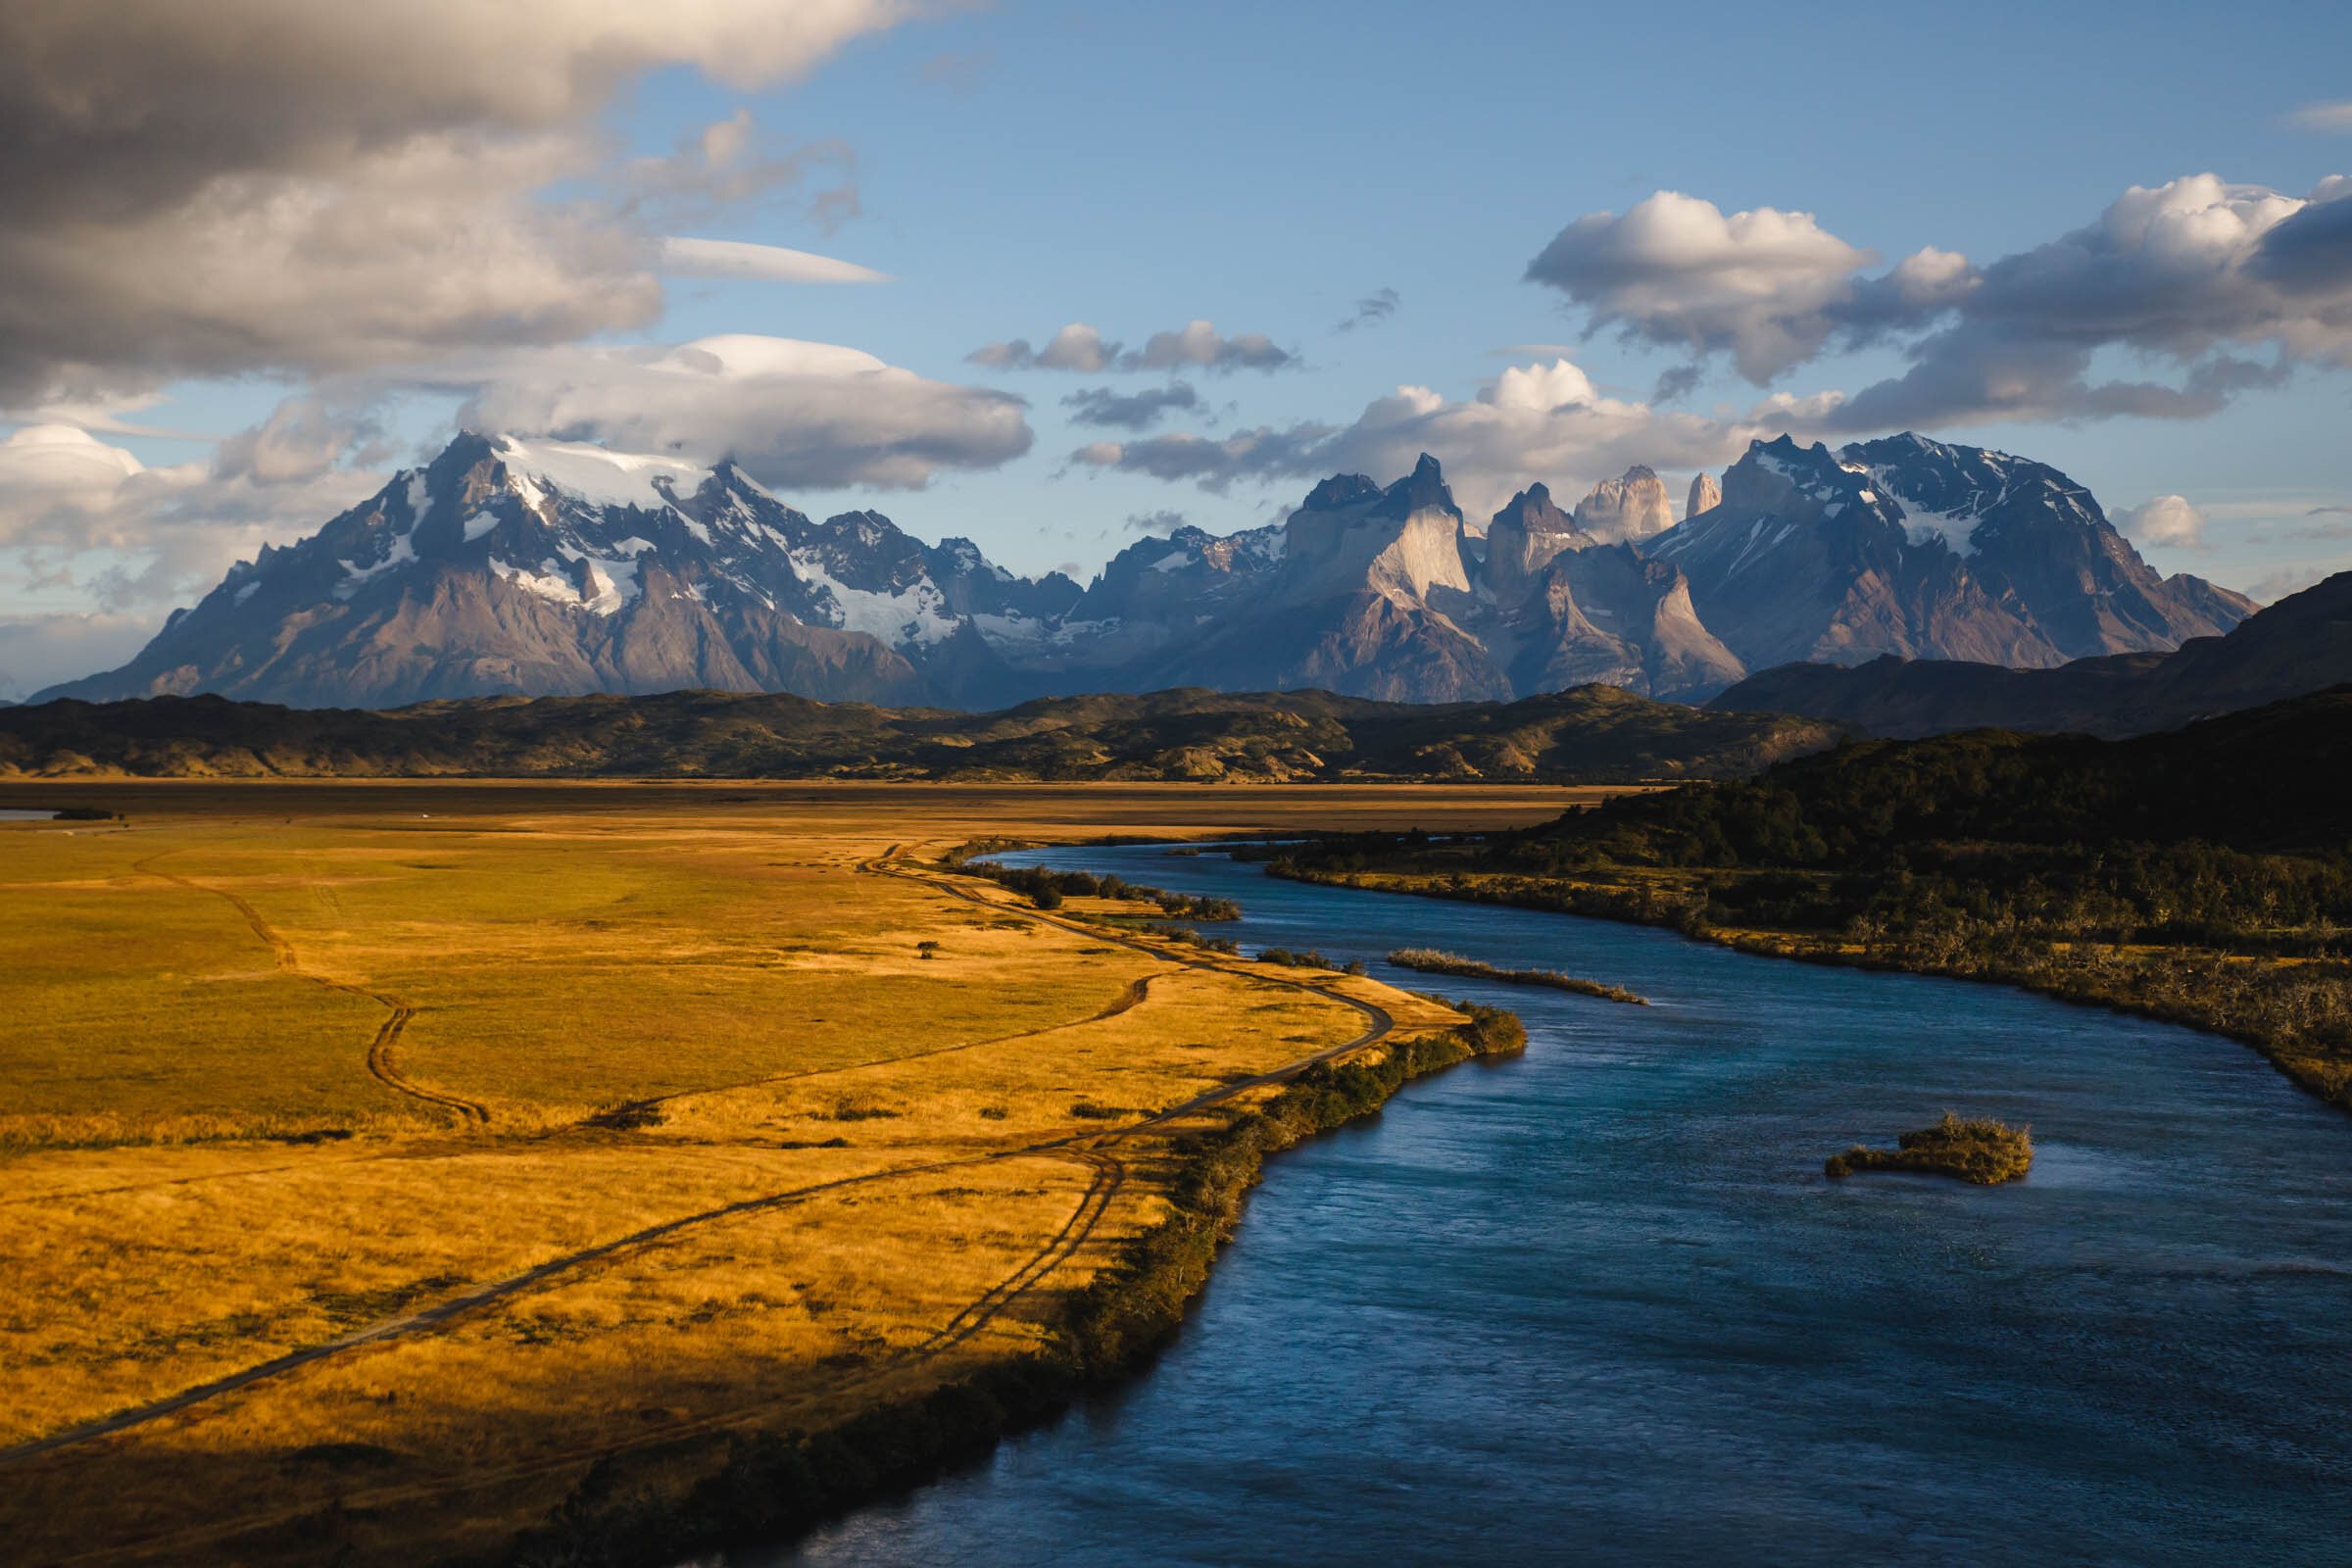  We flew south, following the jagged peaks of the Andes. Our destination was the fairytale landscape of the Torres del Paine (‘Towers of Blue’) National Park. In what seemed a highly inappropriate move, particularly following our daring conquests on 